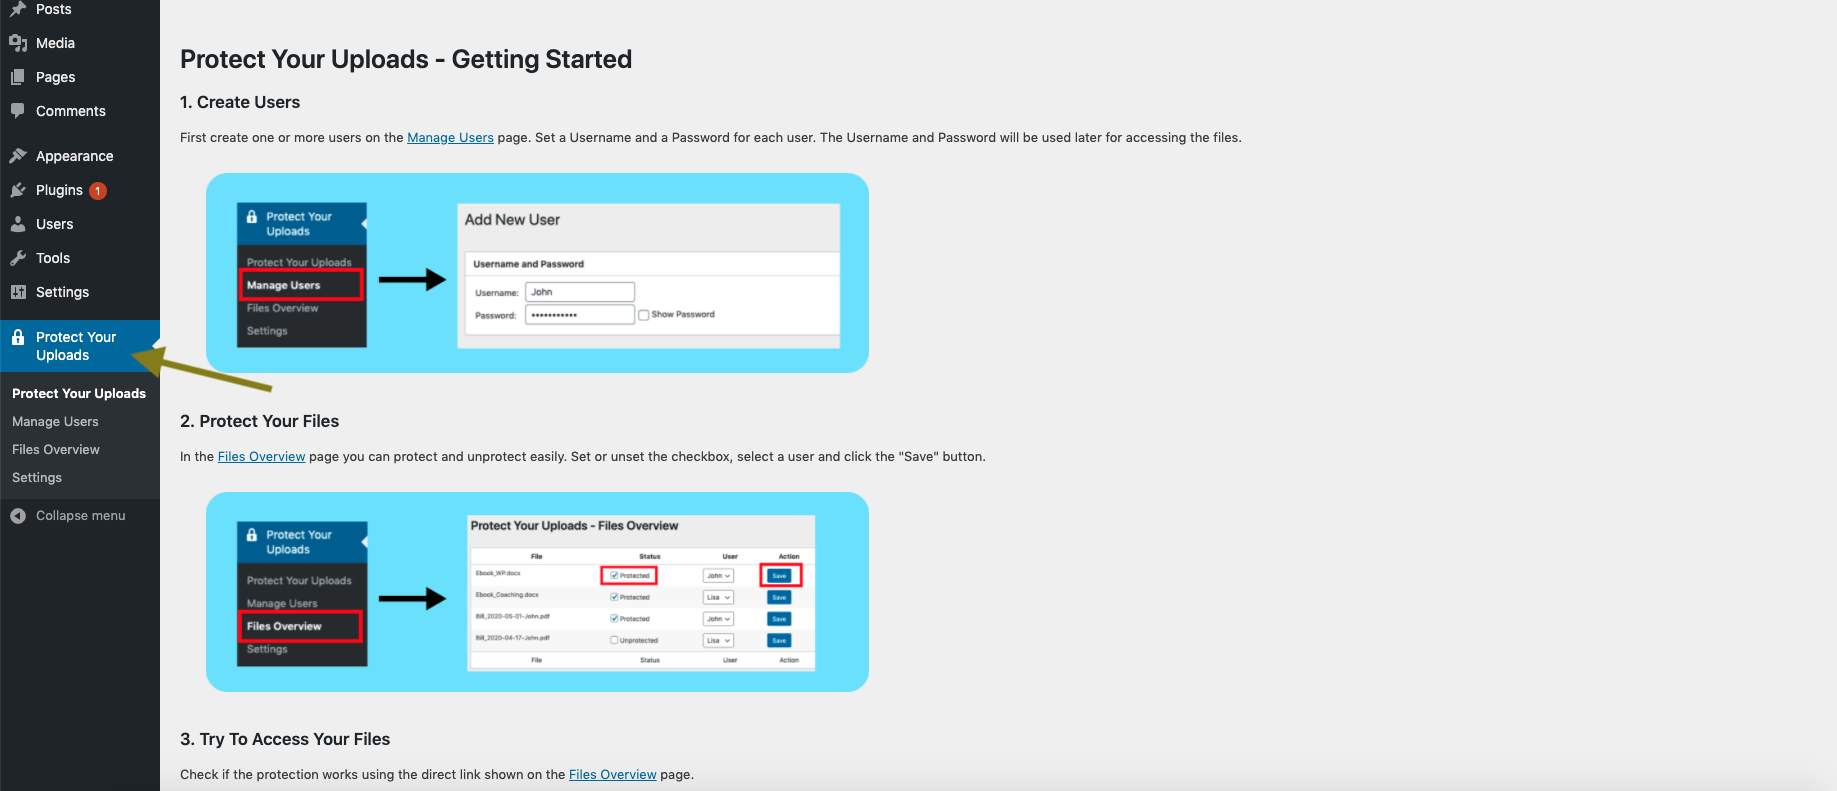 On the plugin main page, you also have a "Getting Started" that shows how to protect uploads